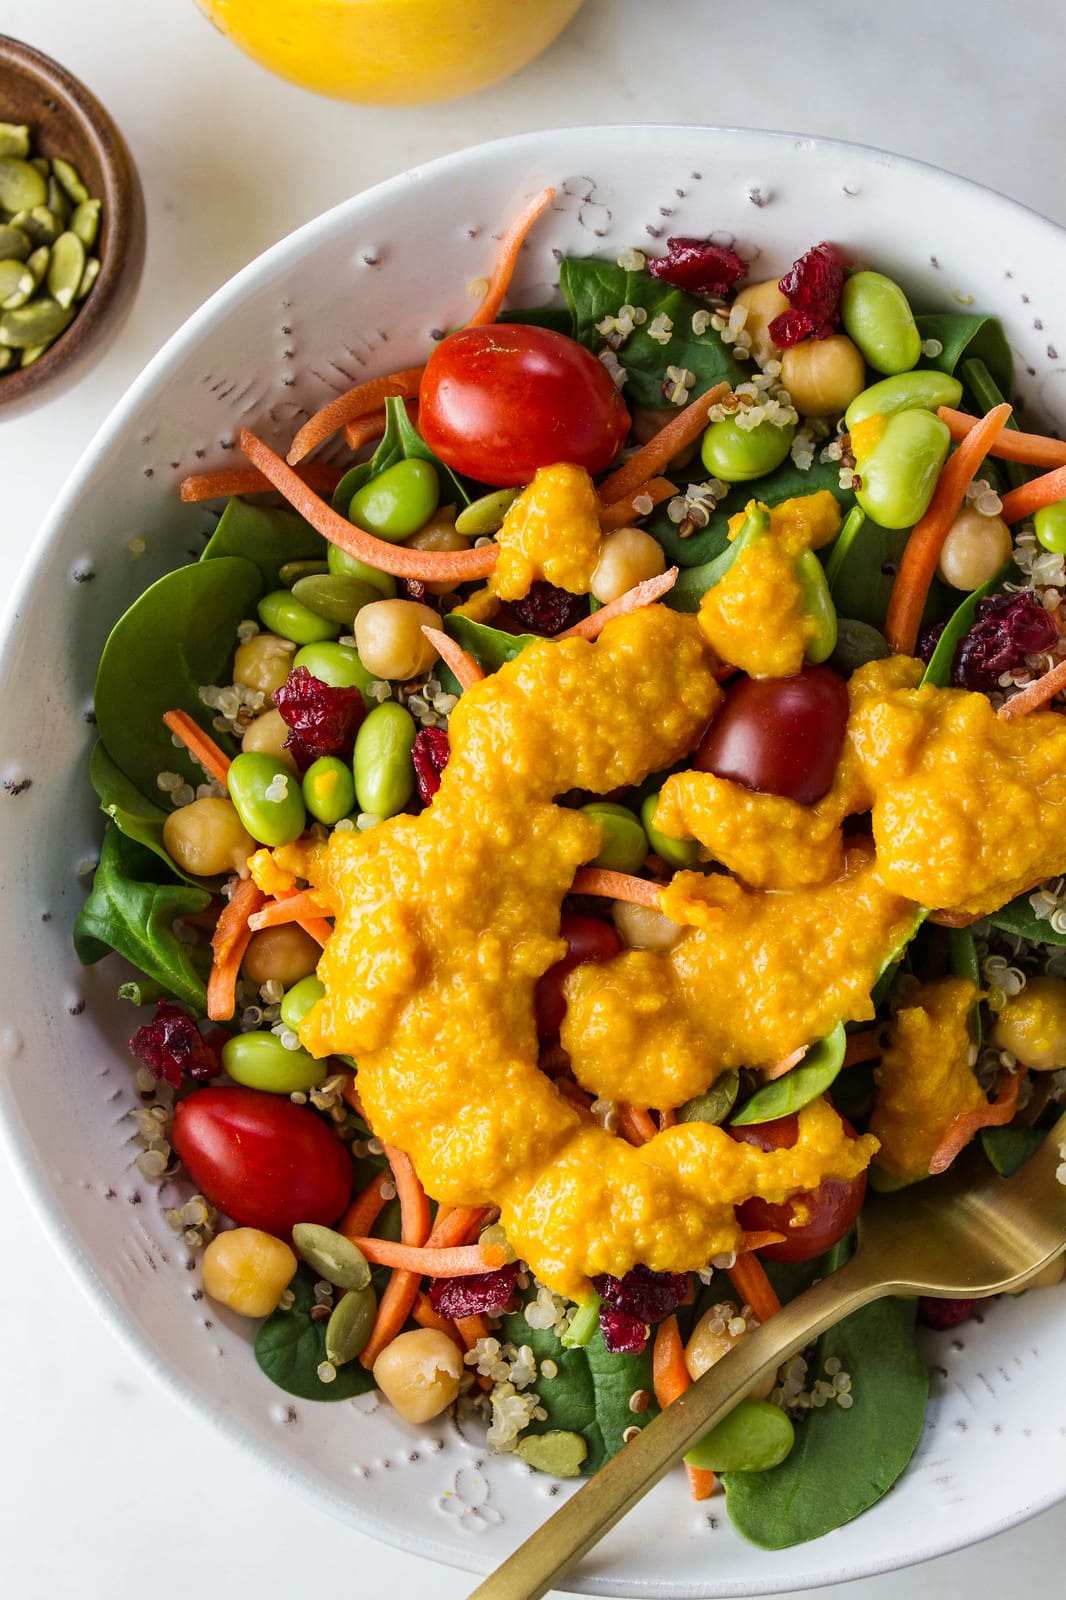 SUPER SPINACH SALAD + CARROT MISO GINGER DRESSING